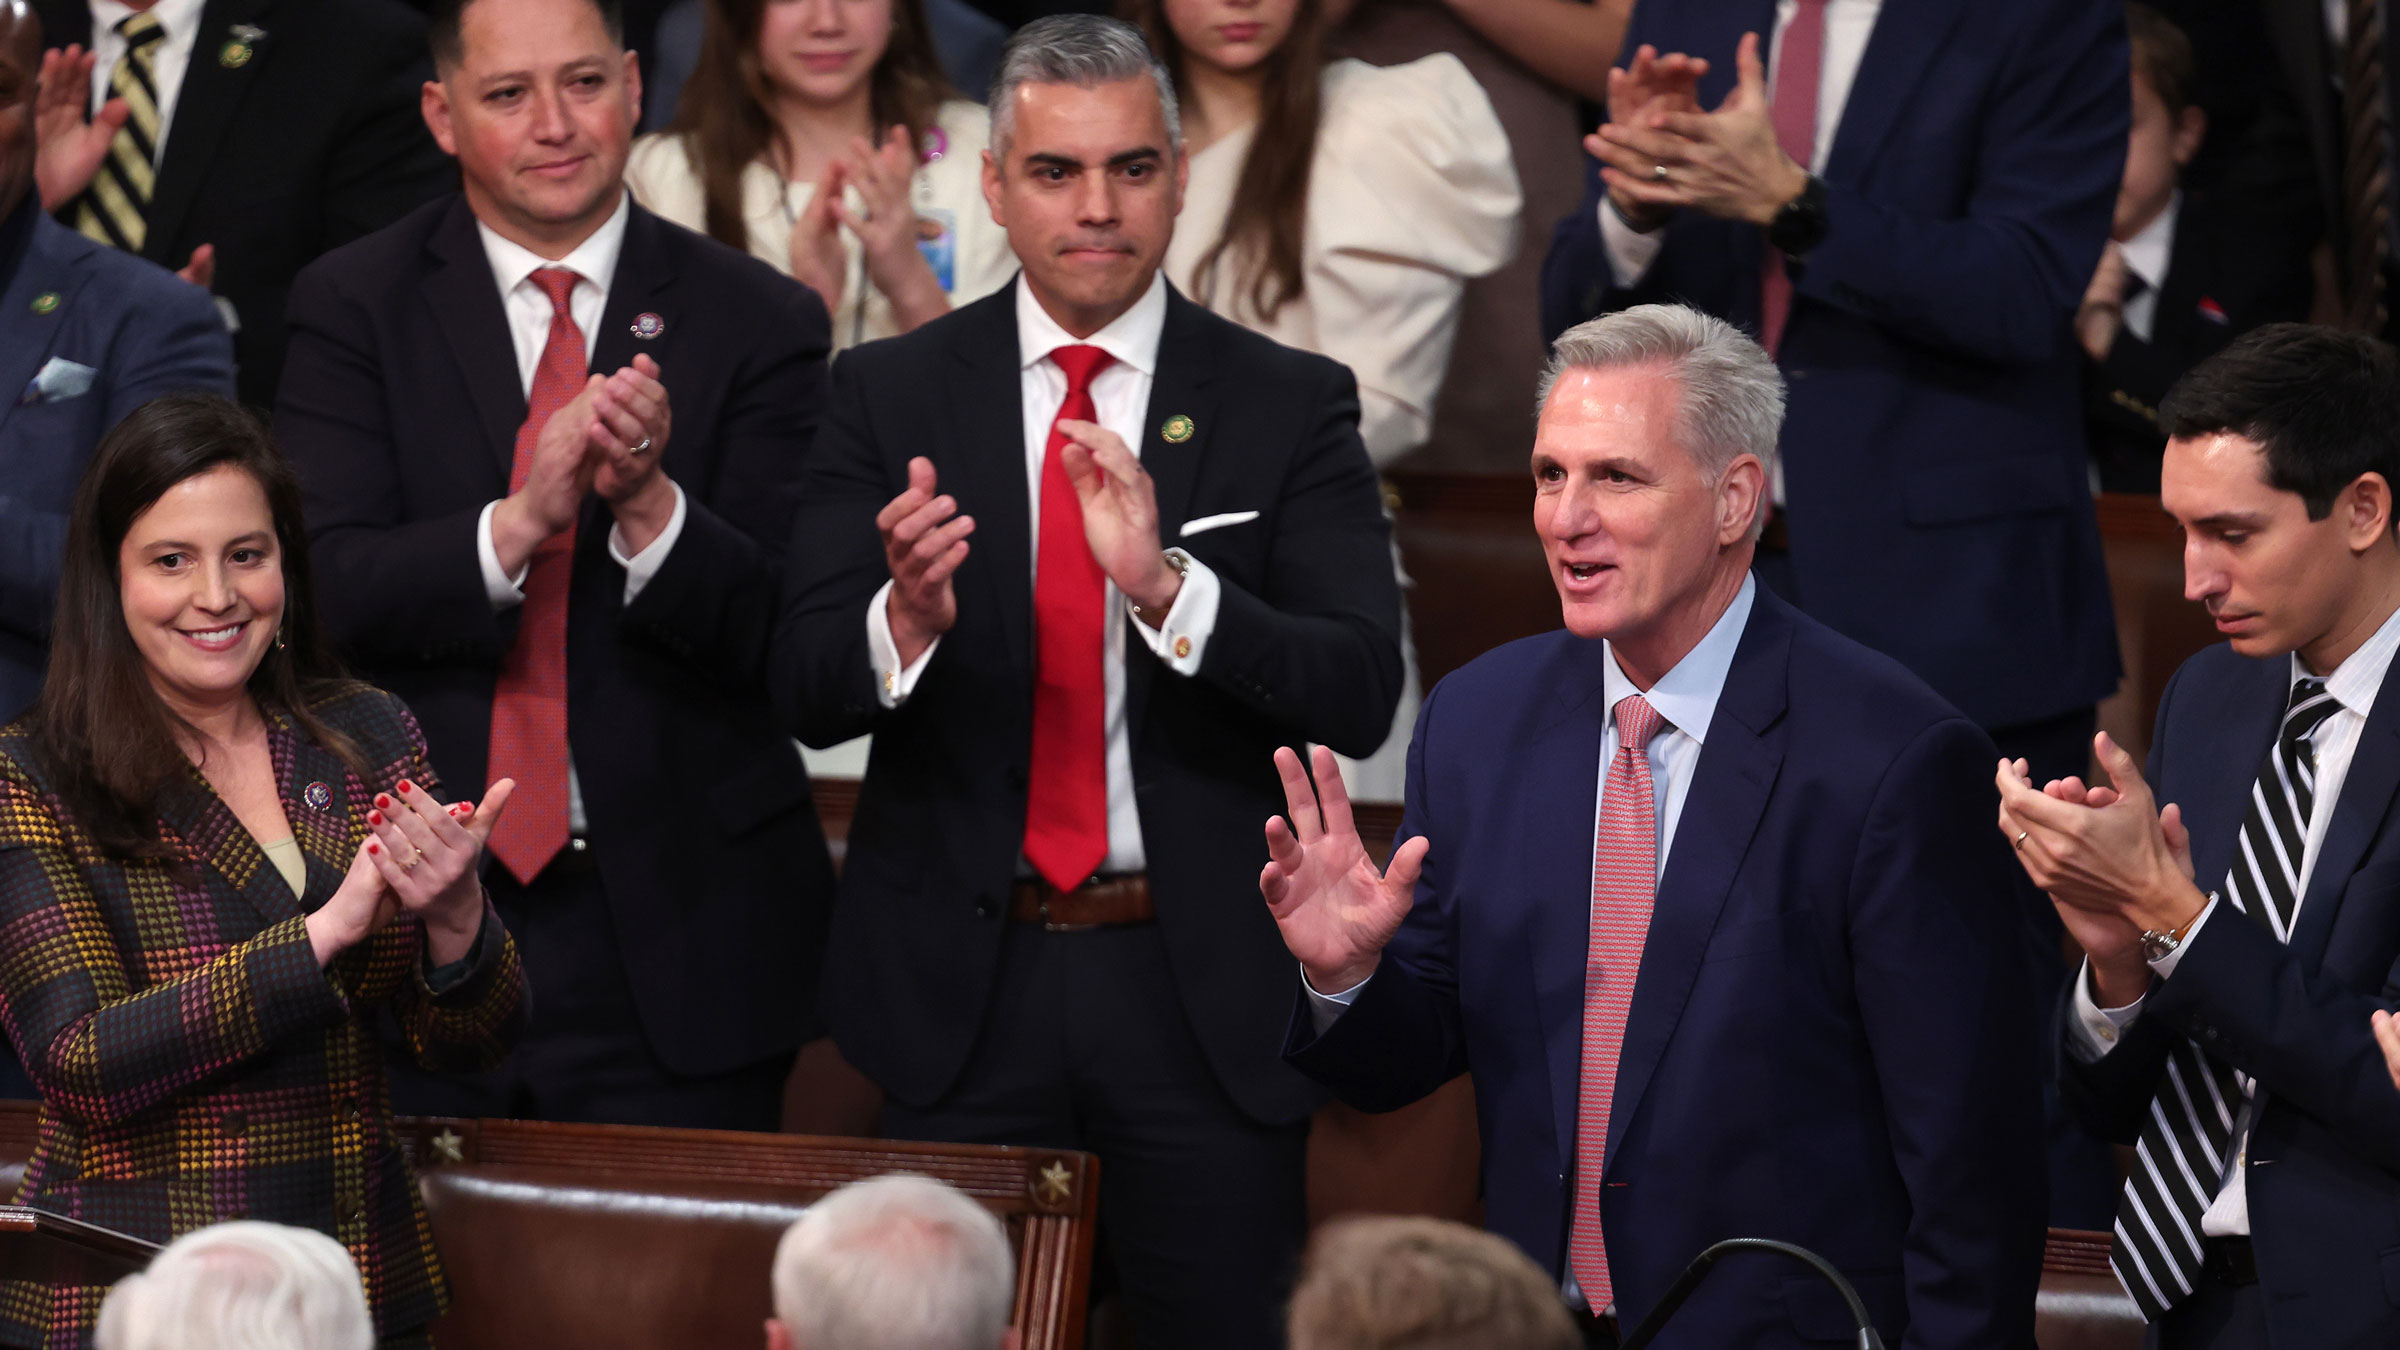 Kevin McCarthy receives applause after being nominated as House Speaker.